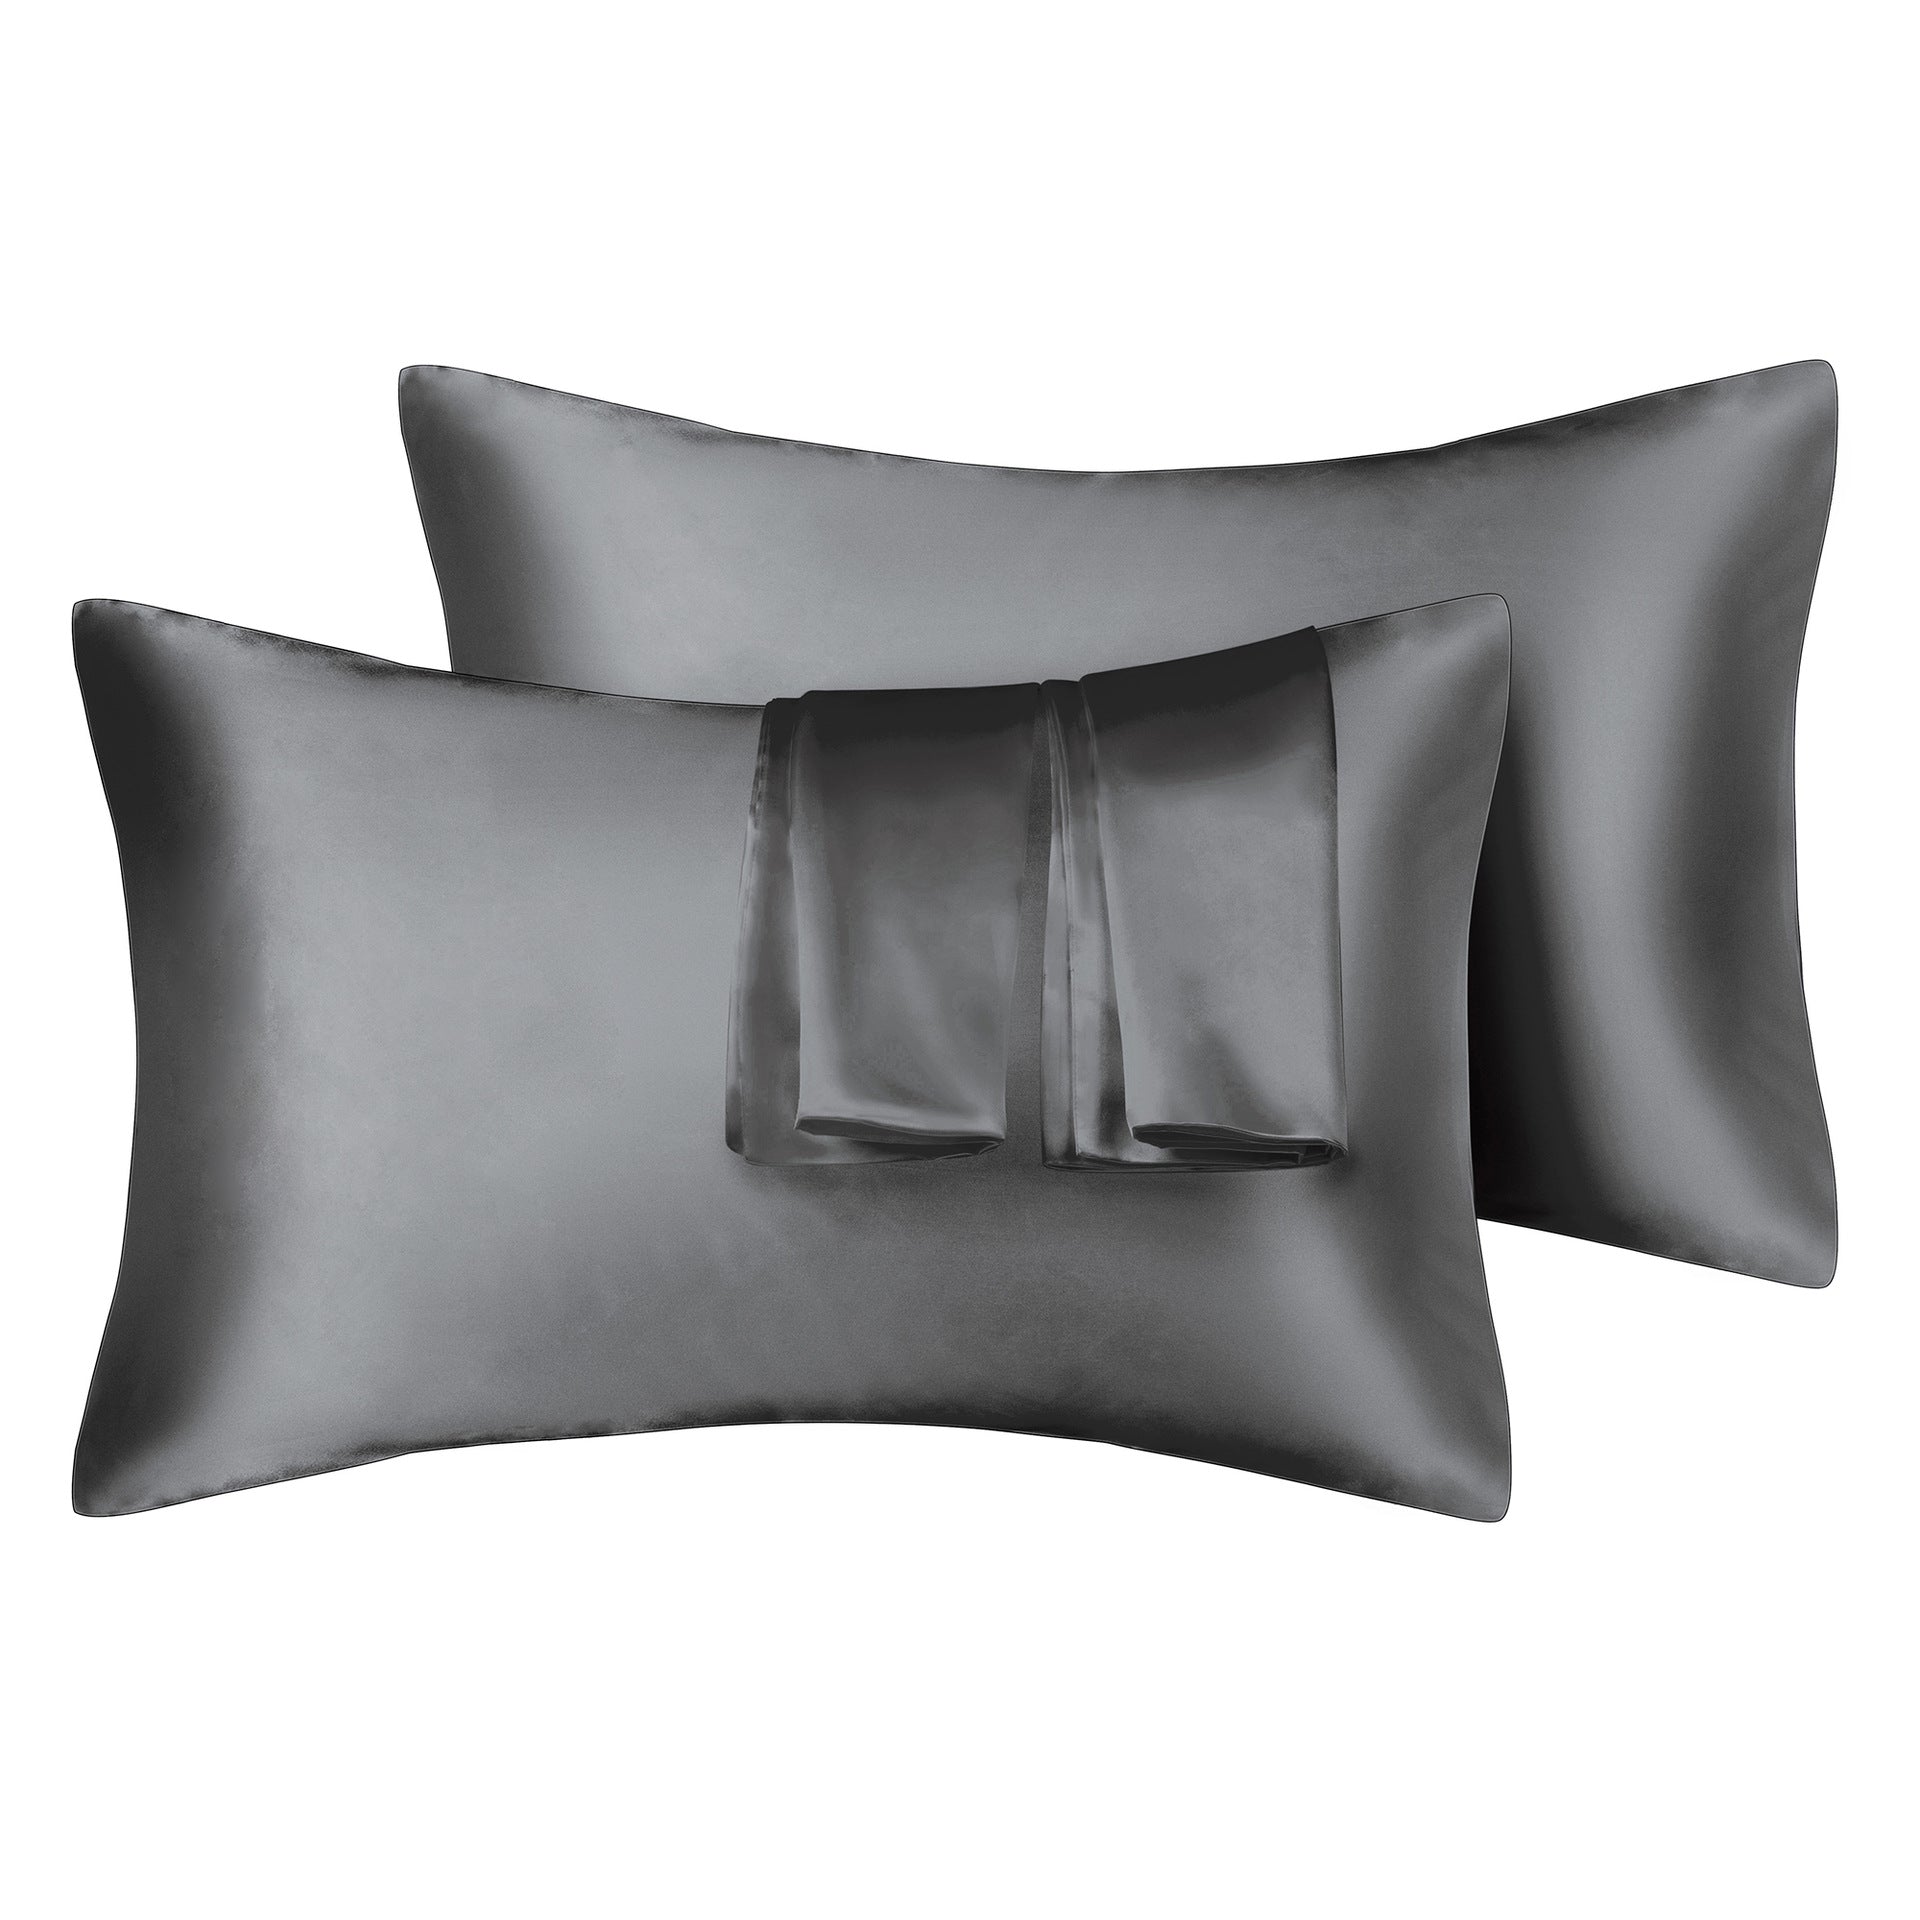 Importikaah-Silk-Pillowcase-single-pack-Elegant-designed-combine-luxury-skincare-haircare-benefits-high-quality-pillowcase-100%-pure-silk-multiple-color-smooth-soft-texture